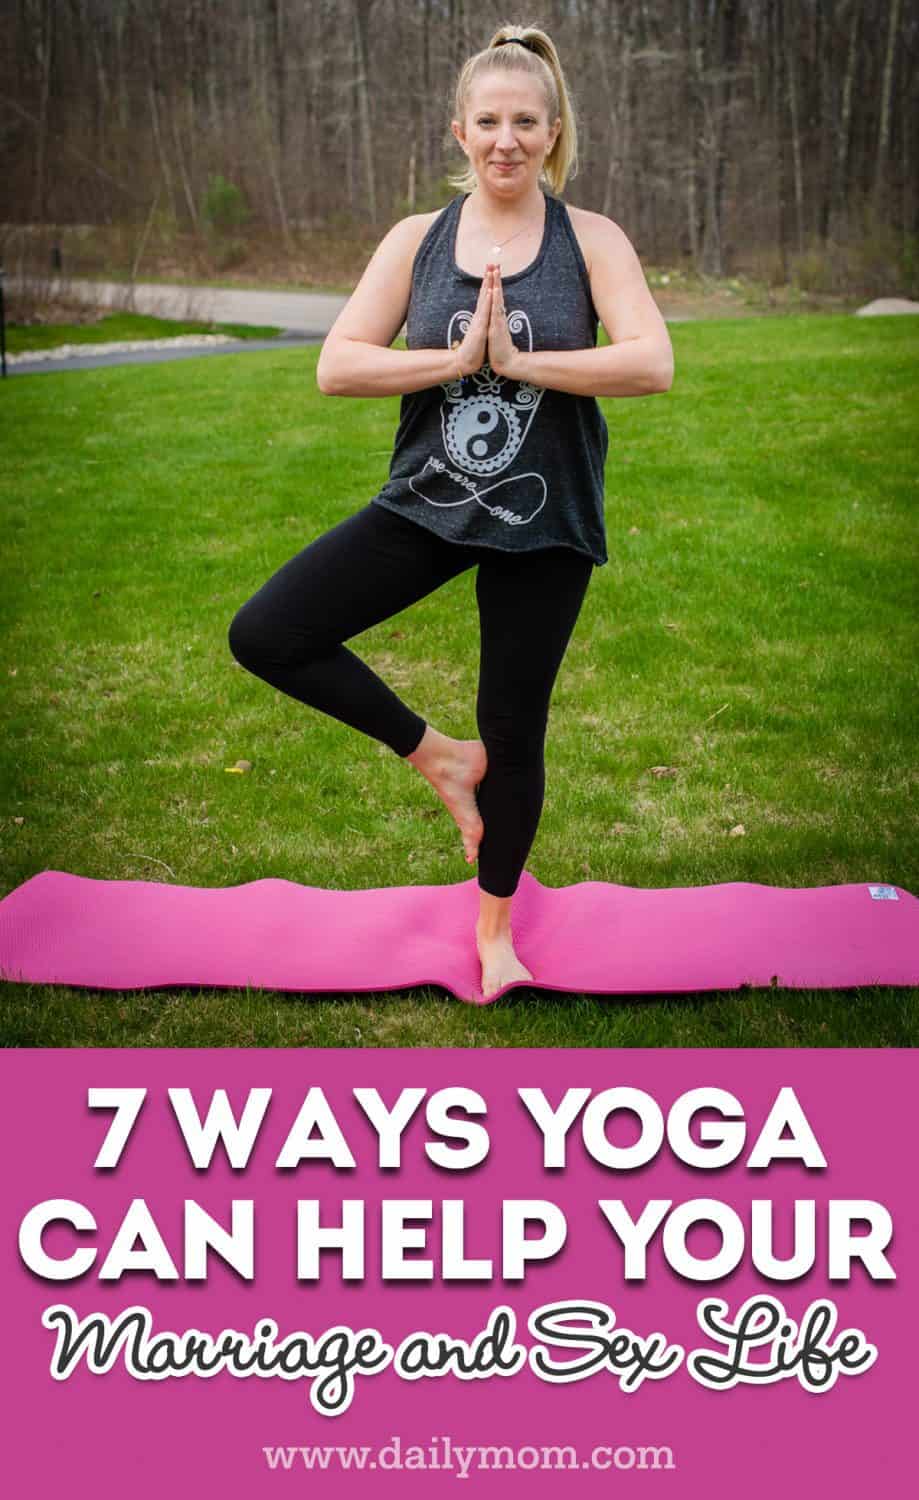 7 Ways Yoga Can Help Your Marriage And Sex Life 7 Daily Mom, Magazine For Families